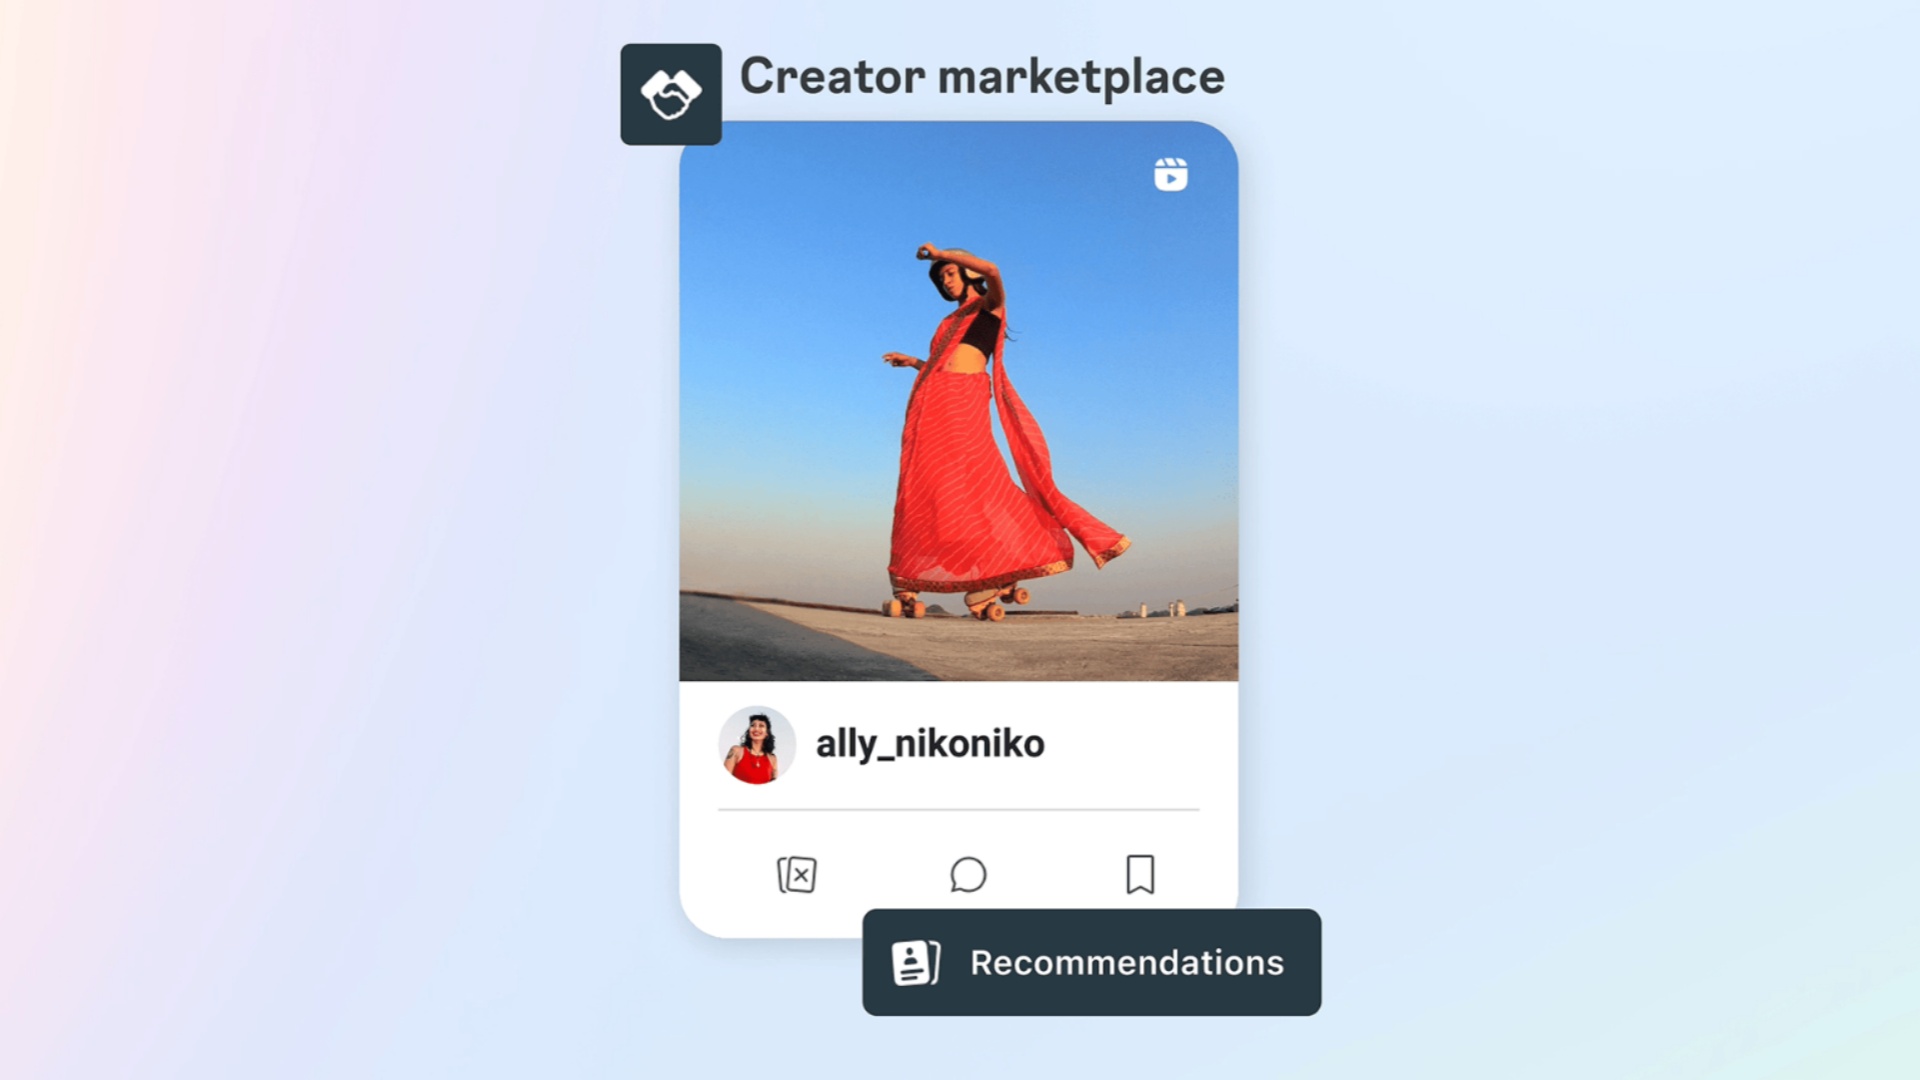 Instagram Expands Marketplace To Connect Brands And Creators In 8 New Countries